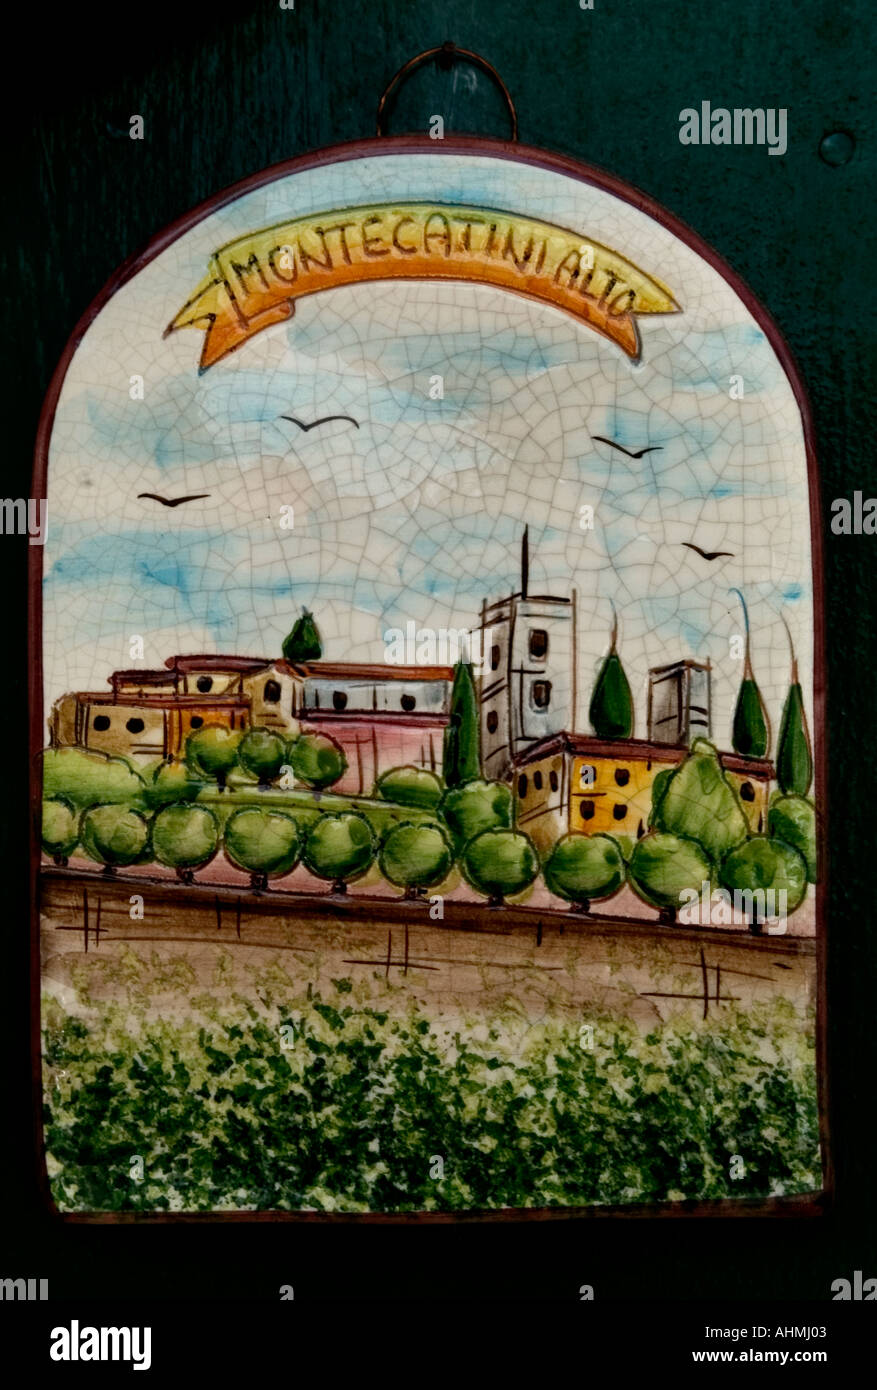 Tuscany Italy ceramic painted pottery earthenware souvenir tile Stock Photo